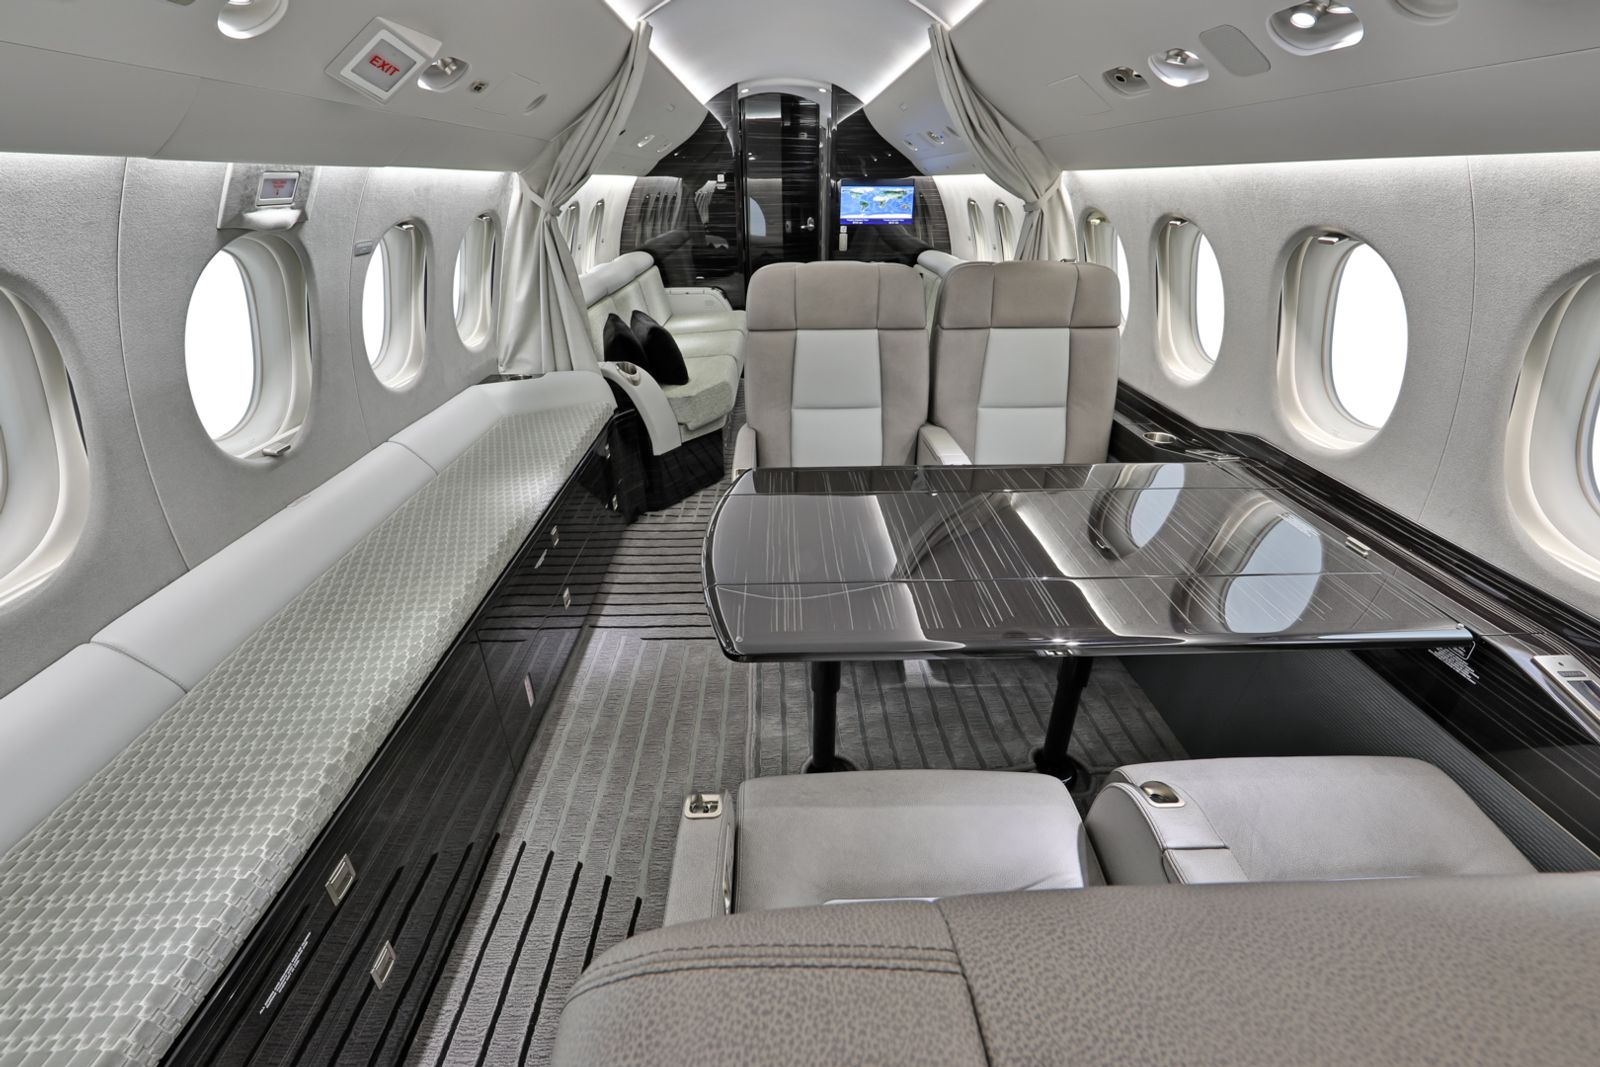 Dassault Falcon 7X  S/N 152 for sale | gallery image: /userfiles/images/F7X_sn152/mid%20aft.jpg